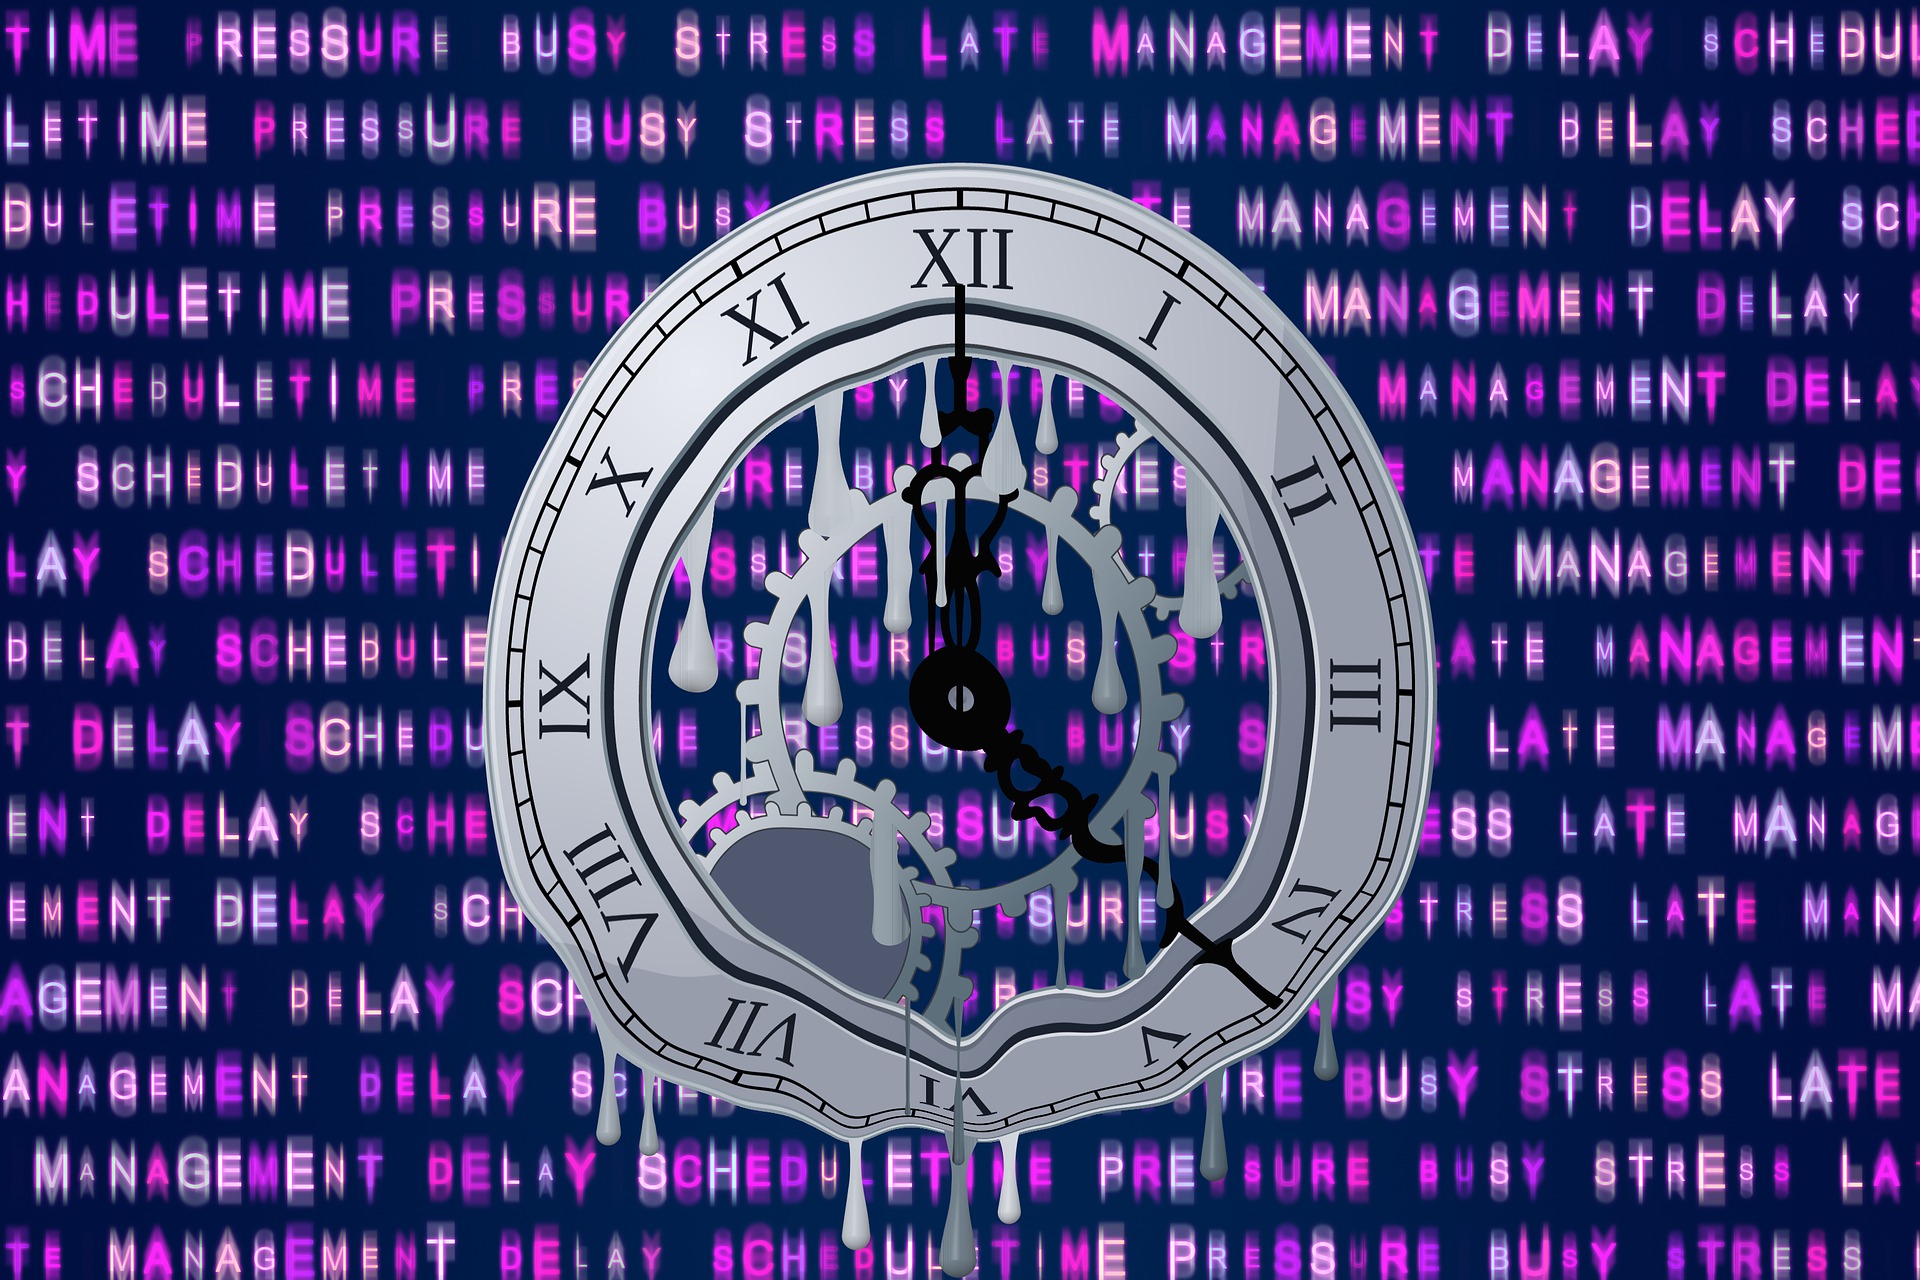 Against a purple-pink background of words like 'delay', 'stress', 'busy', 'pressure', we see a metal clock face. The clock face is blurry and appears to droop.